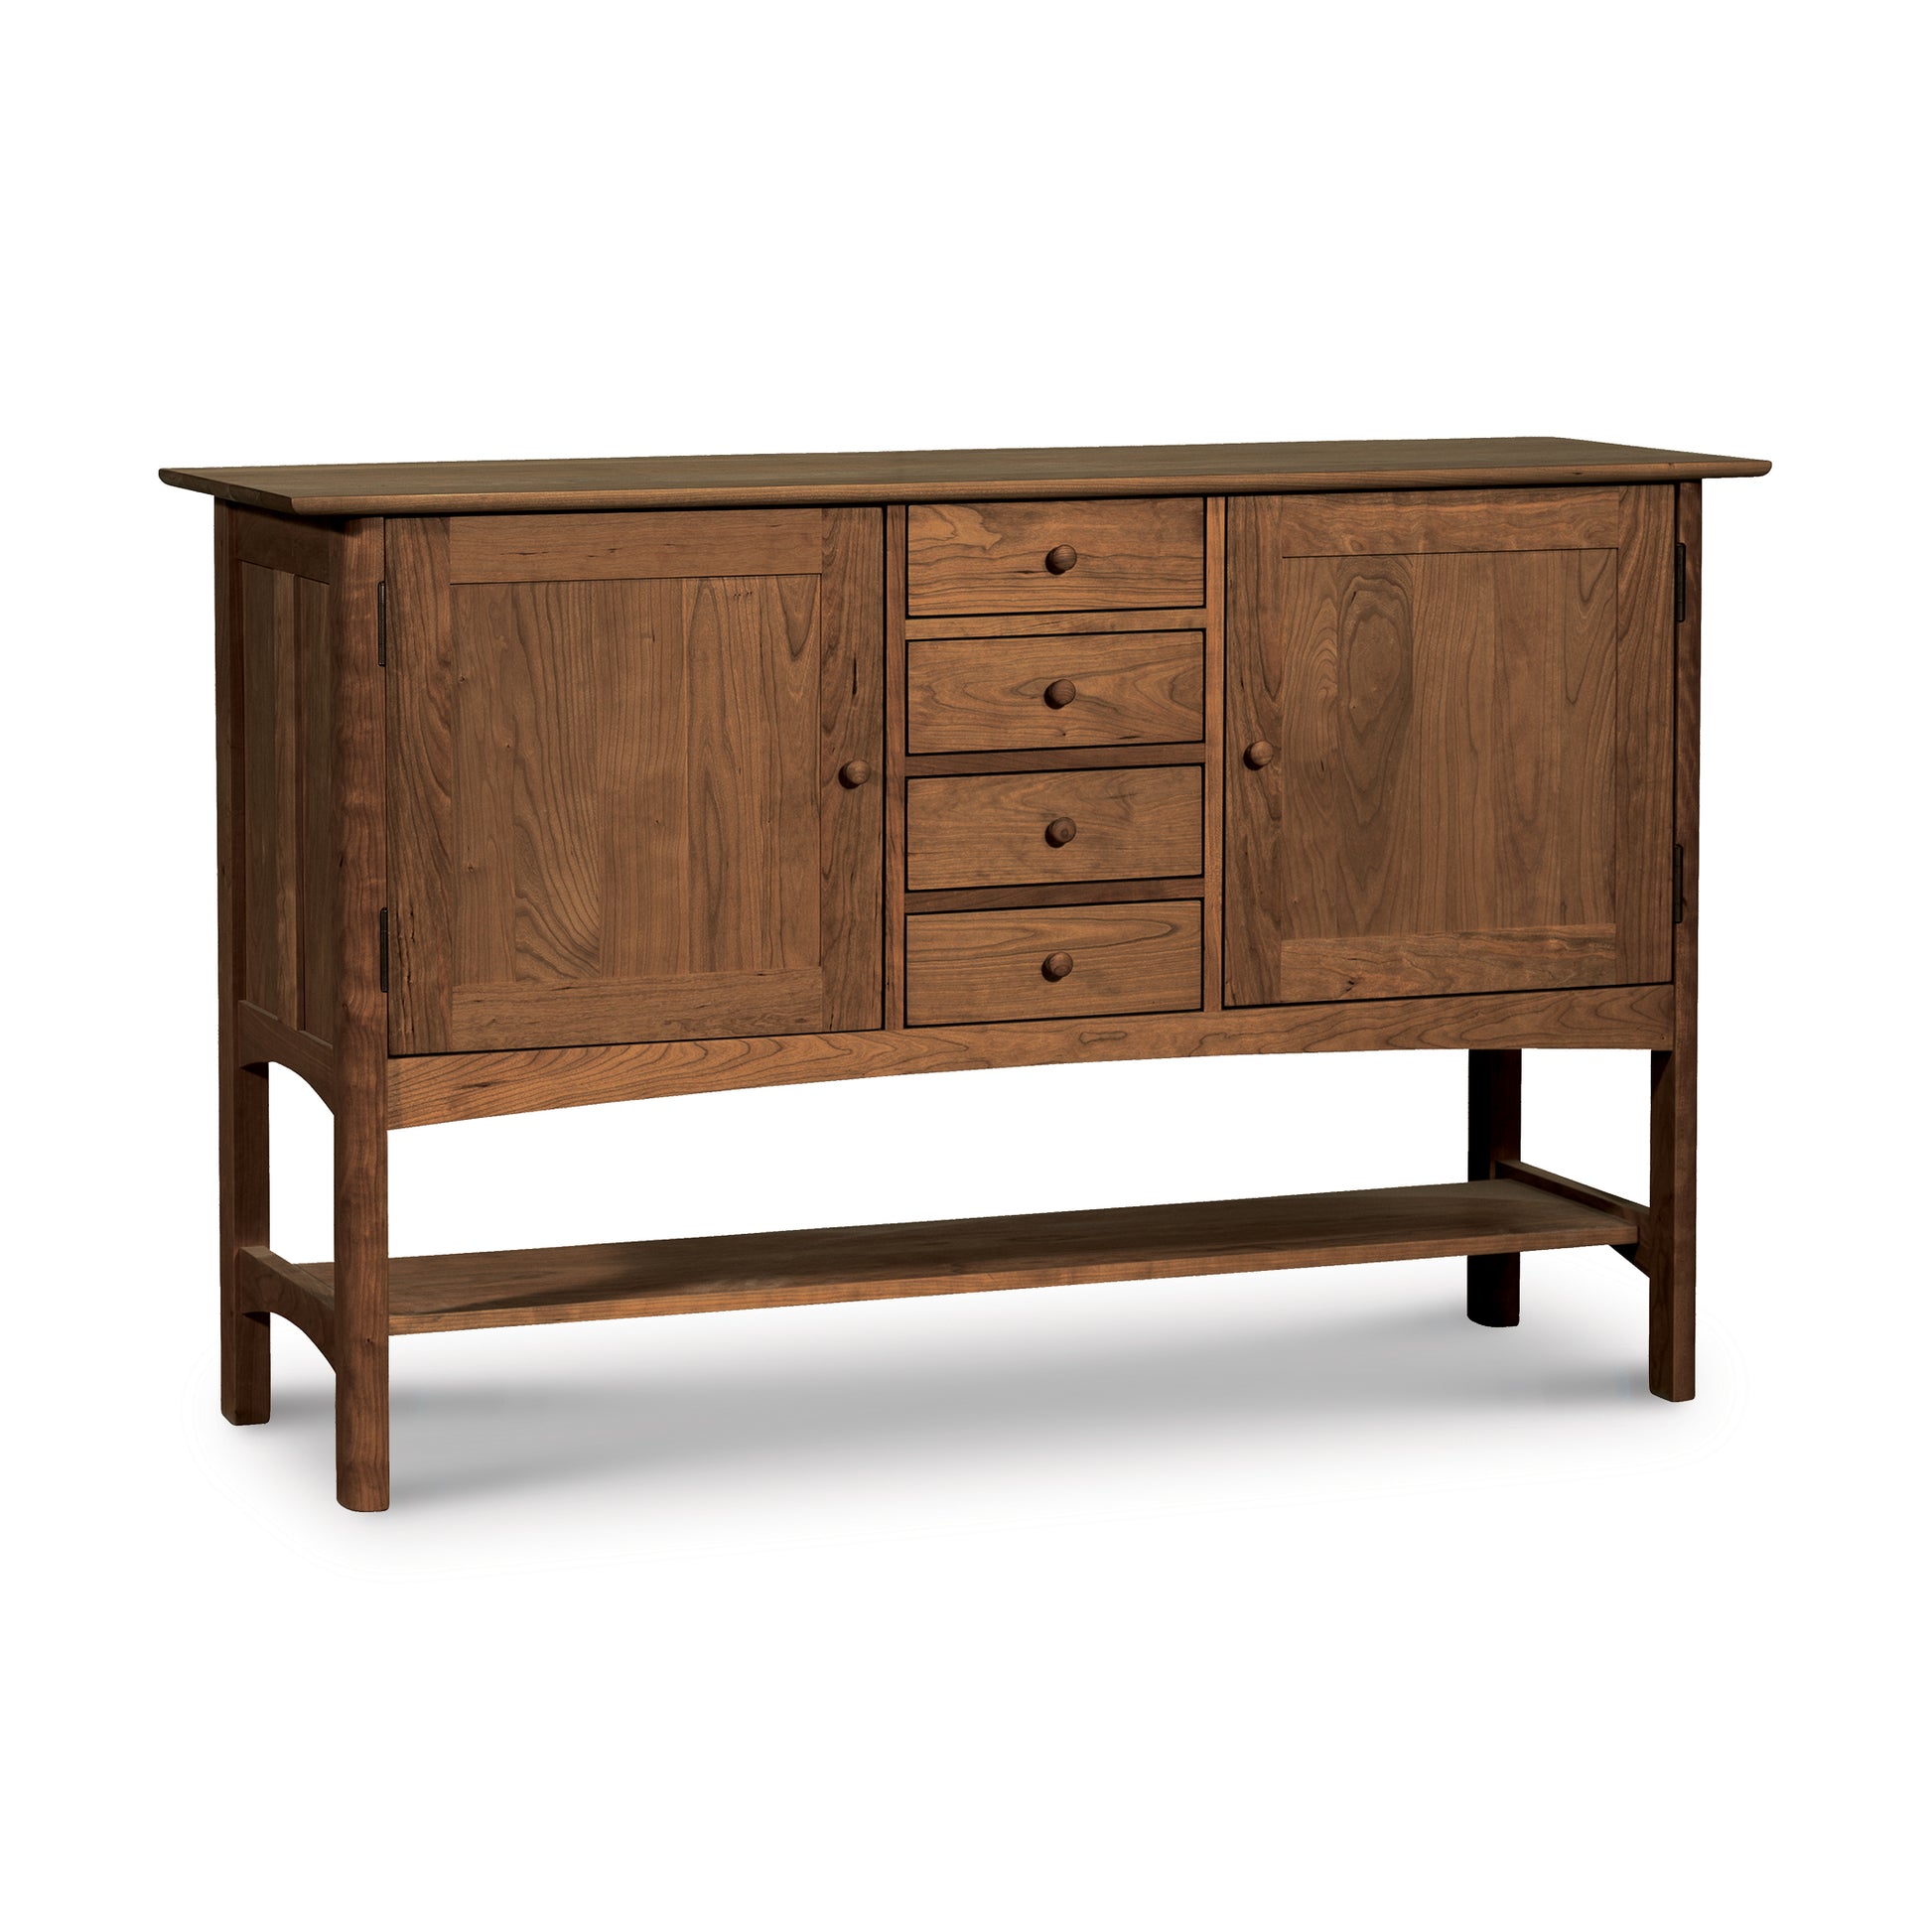 A Vermont Furniture Designs Heartwood Shaker Huntboard with three drawers in the center flanked by two cabinet doors, set against a white background.